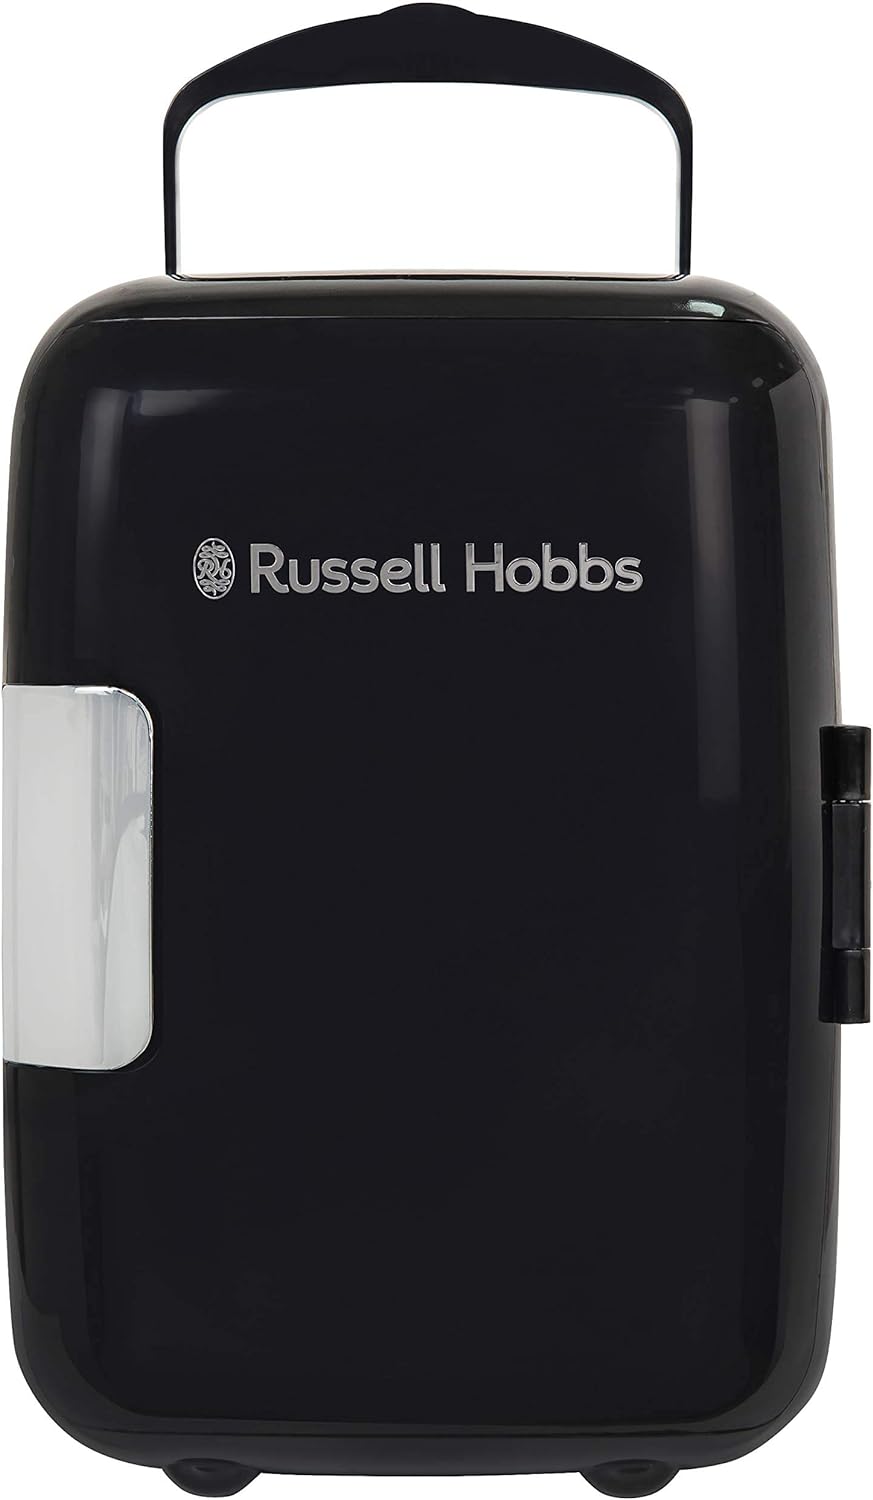 Russell Hobbs Mini Cooler RH4CLR1001B 4L/6 Can Portable Mini Cooler & Warmer for Drinks, Cosmetics/Makeup/Skincare, AC/DC Power, Retro Style, Black, For Bedroom, Home, Caravan, Car - Amazing Gadgets Outlet